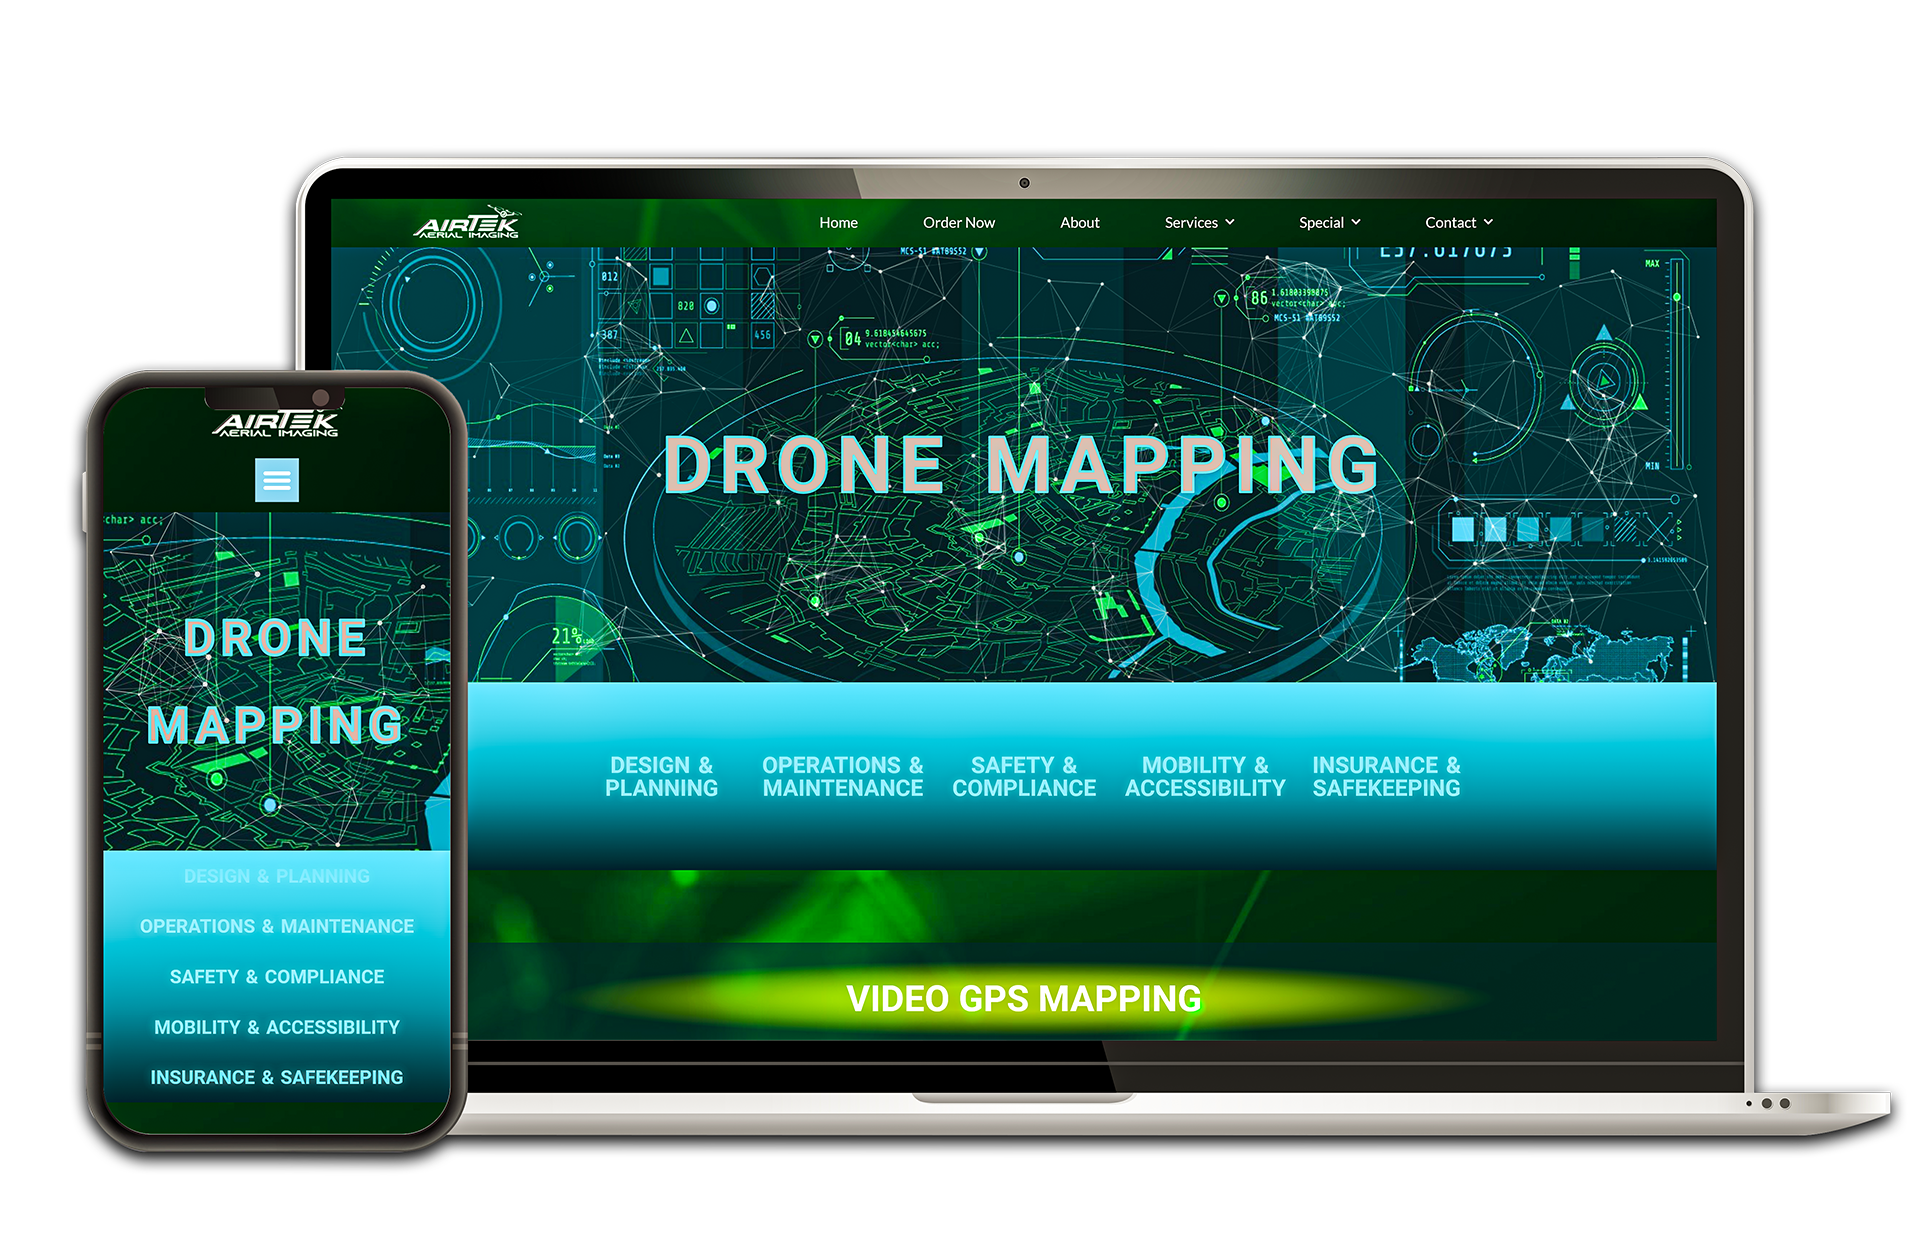 Drone Mapping Hero screen on two devices